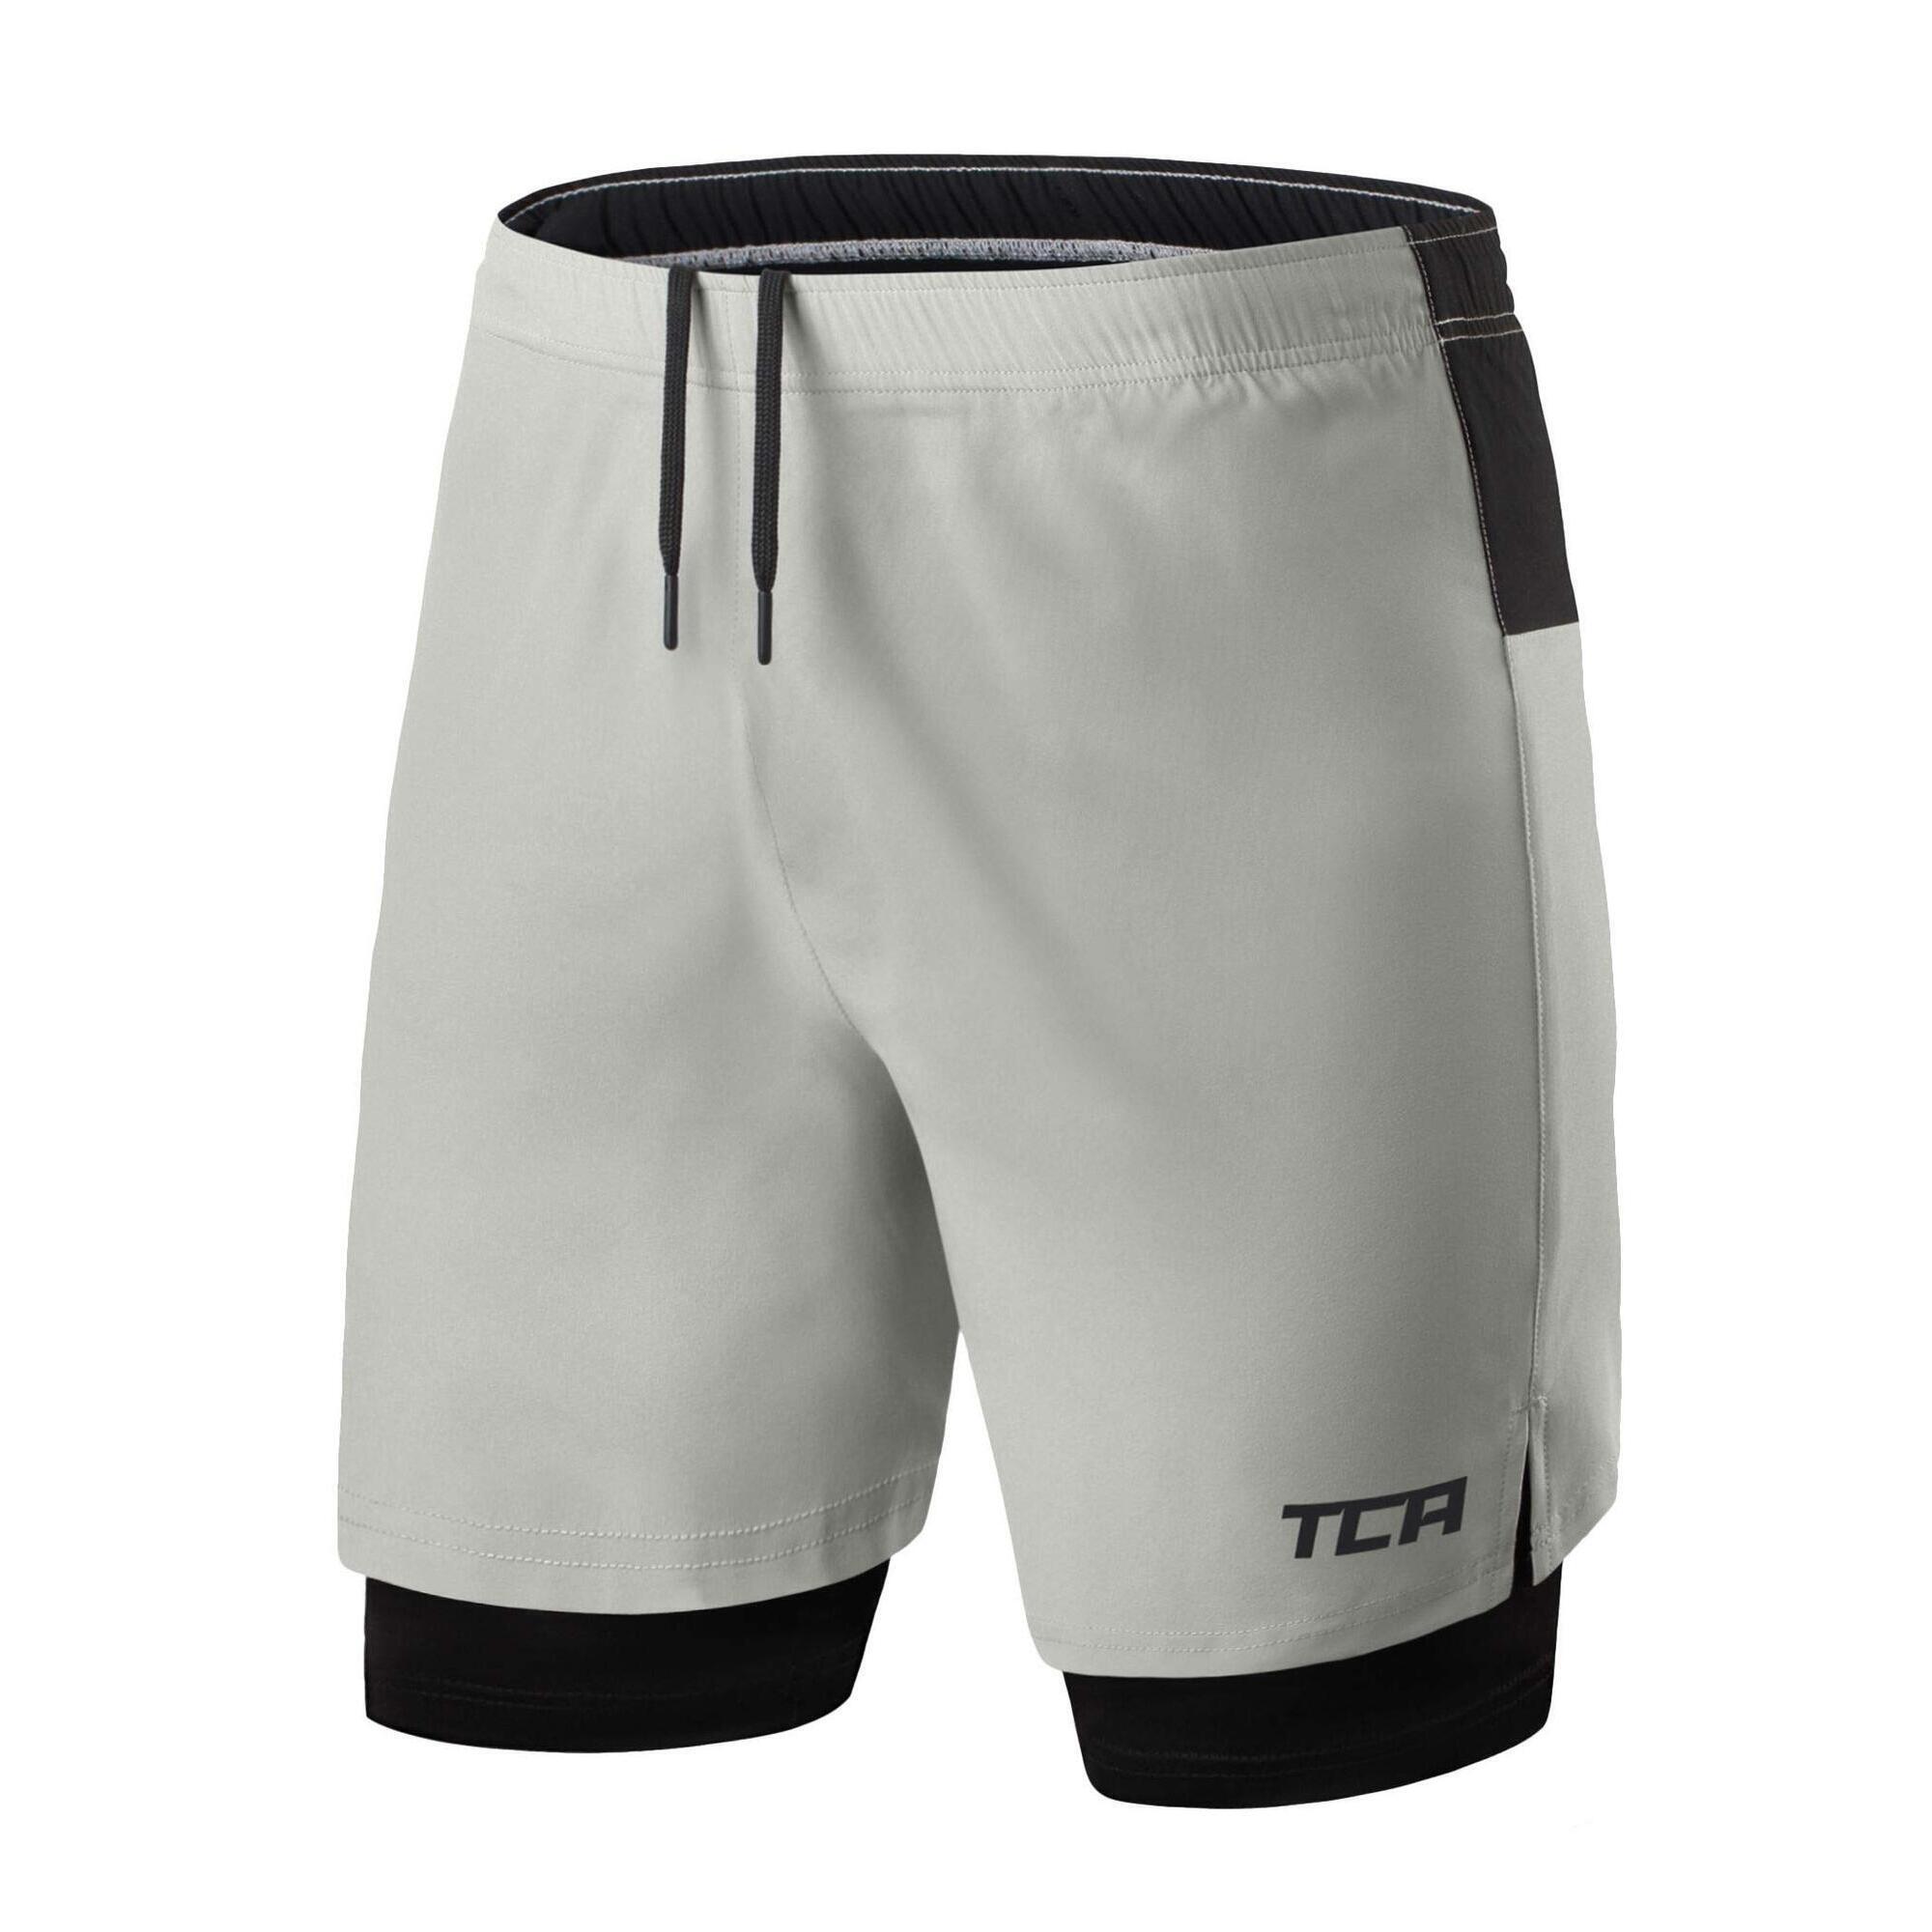 TCA Men's Ultra 2-in-1 Running Shorts with Key Pocket - Cool Grey/Black